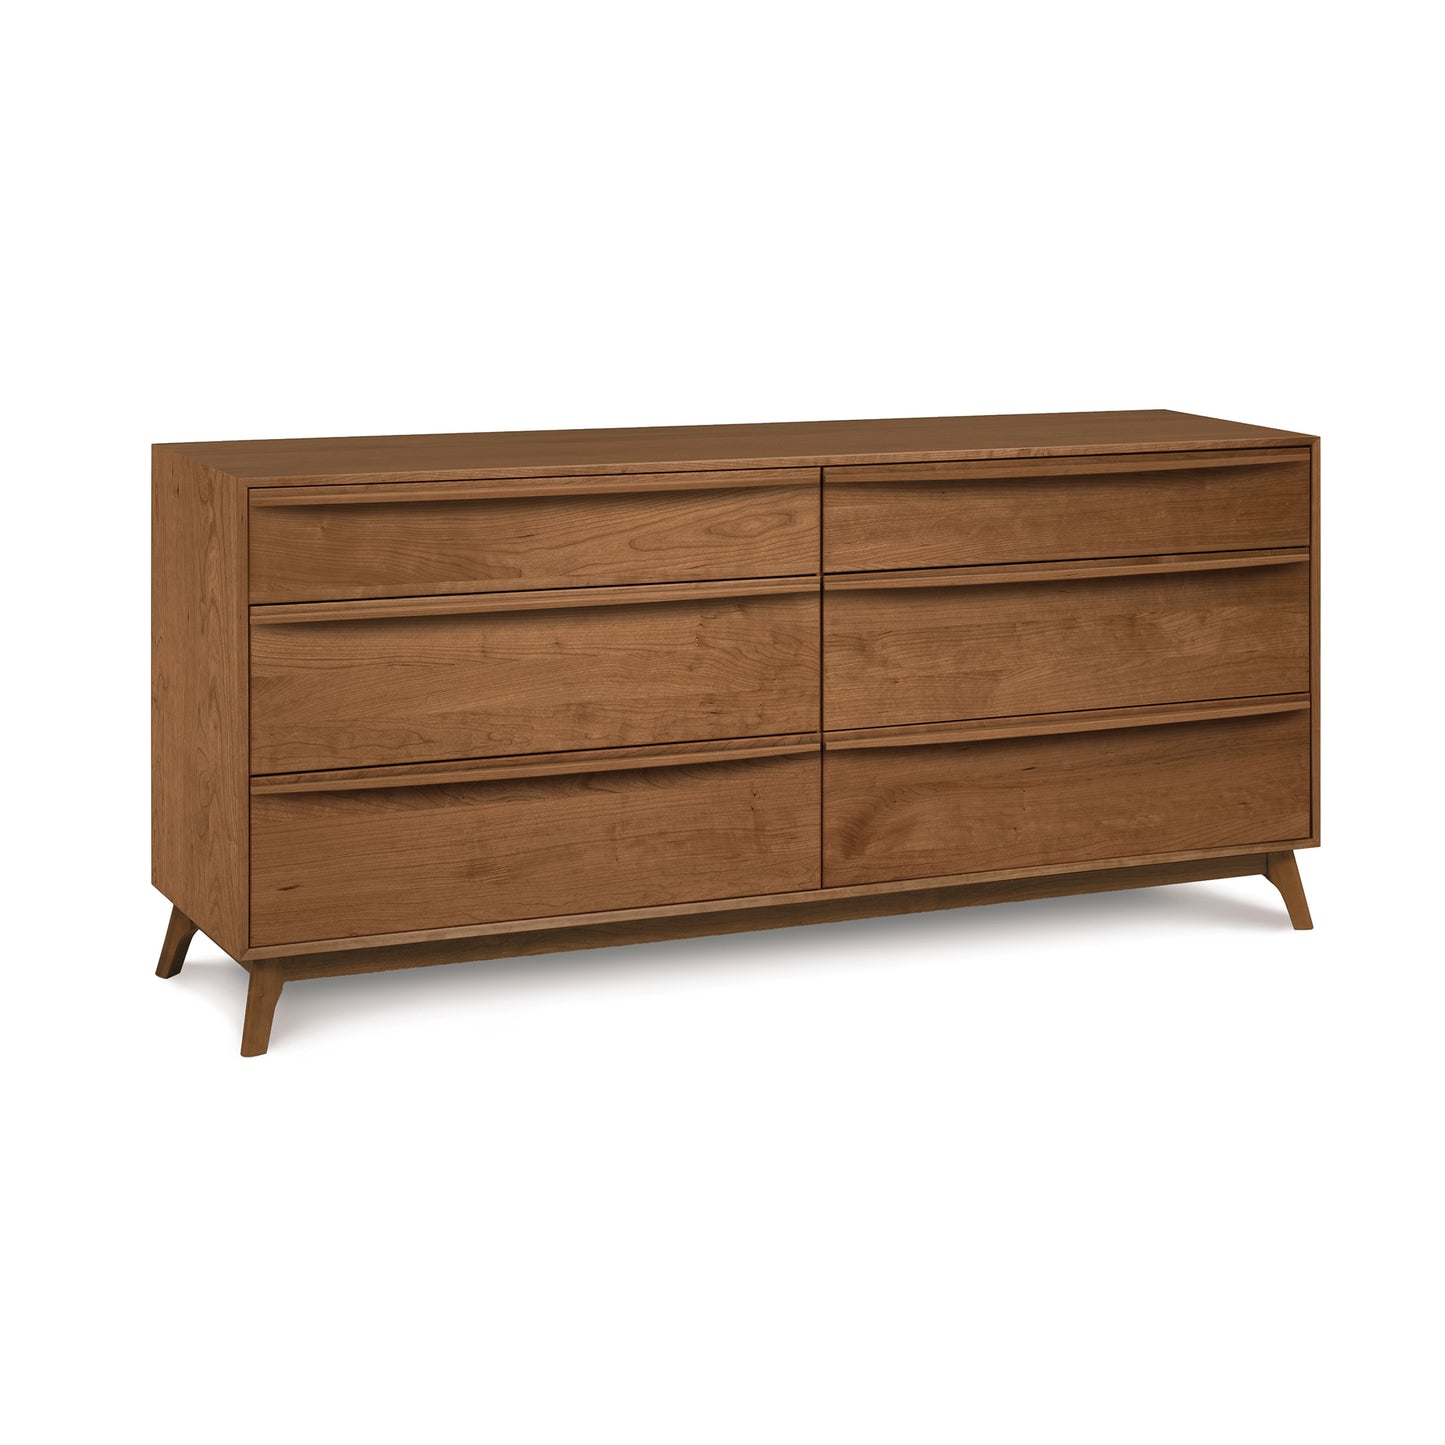 A Vermont crafted furniture, solid natural hardwood six-drawer Catalina Dresser from Copeland Furniture with angled legs and a clean, mid-century modern design, isolated on a white background.